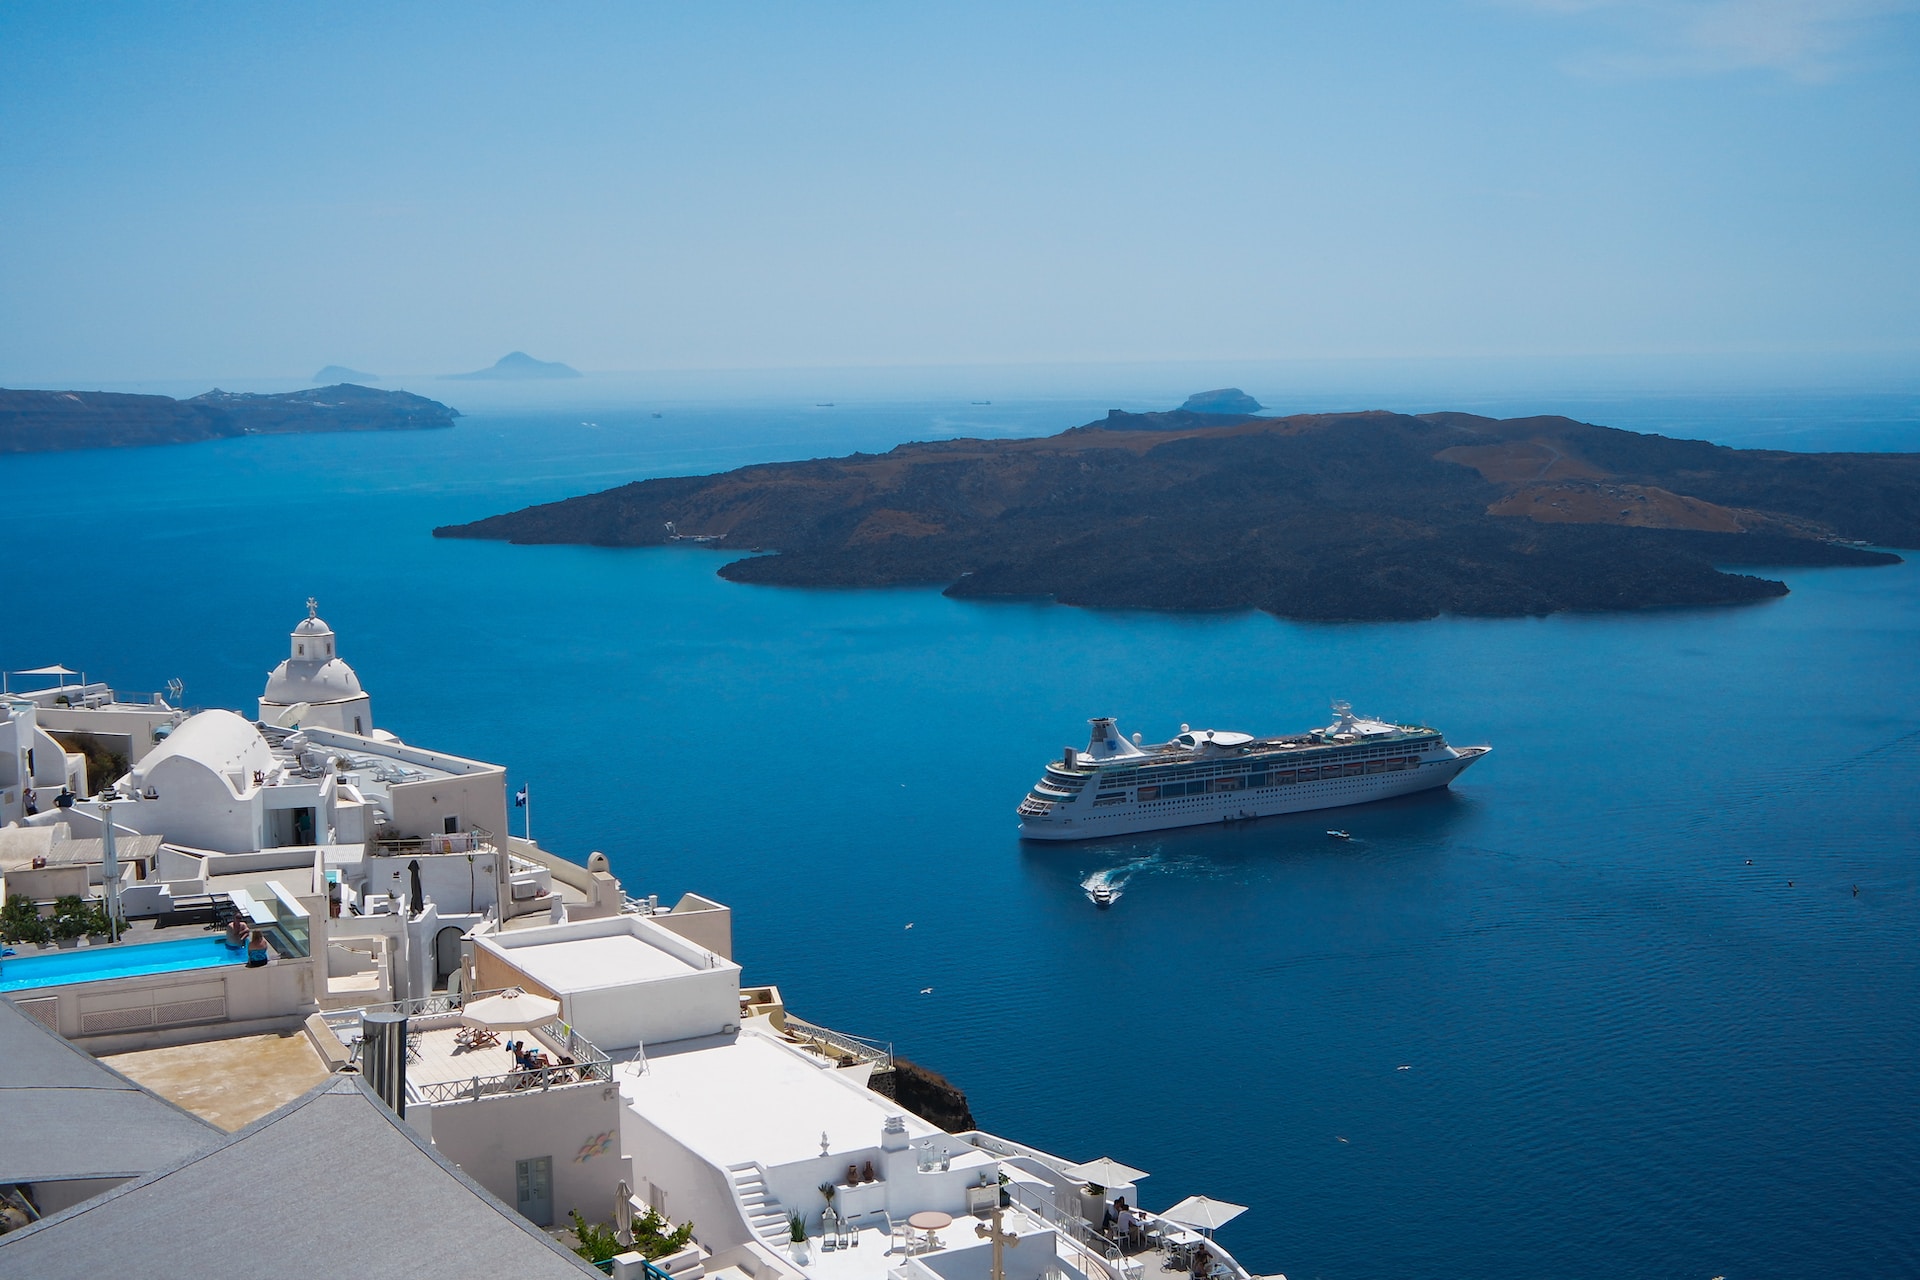 Plan the perfect itinerary for your valuable 2 days in Santorini